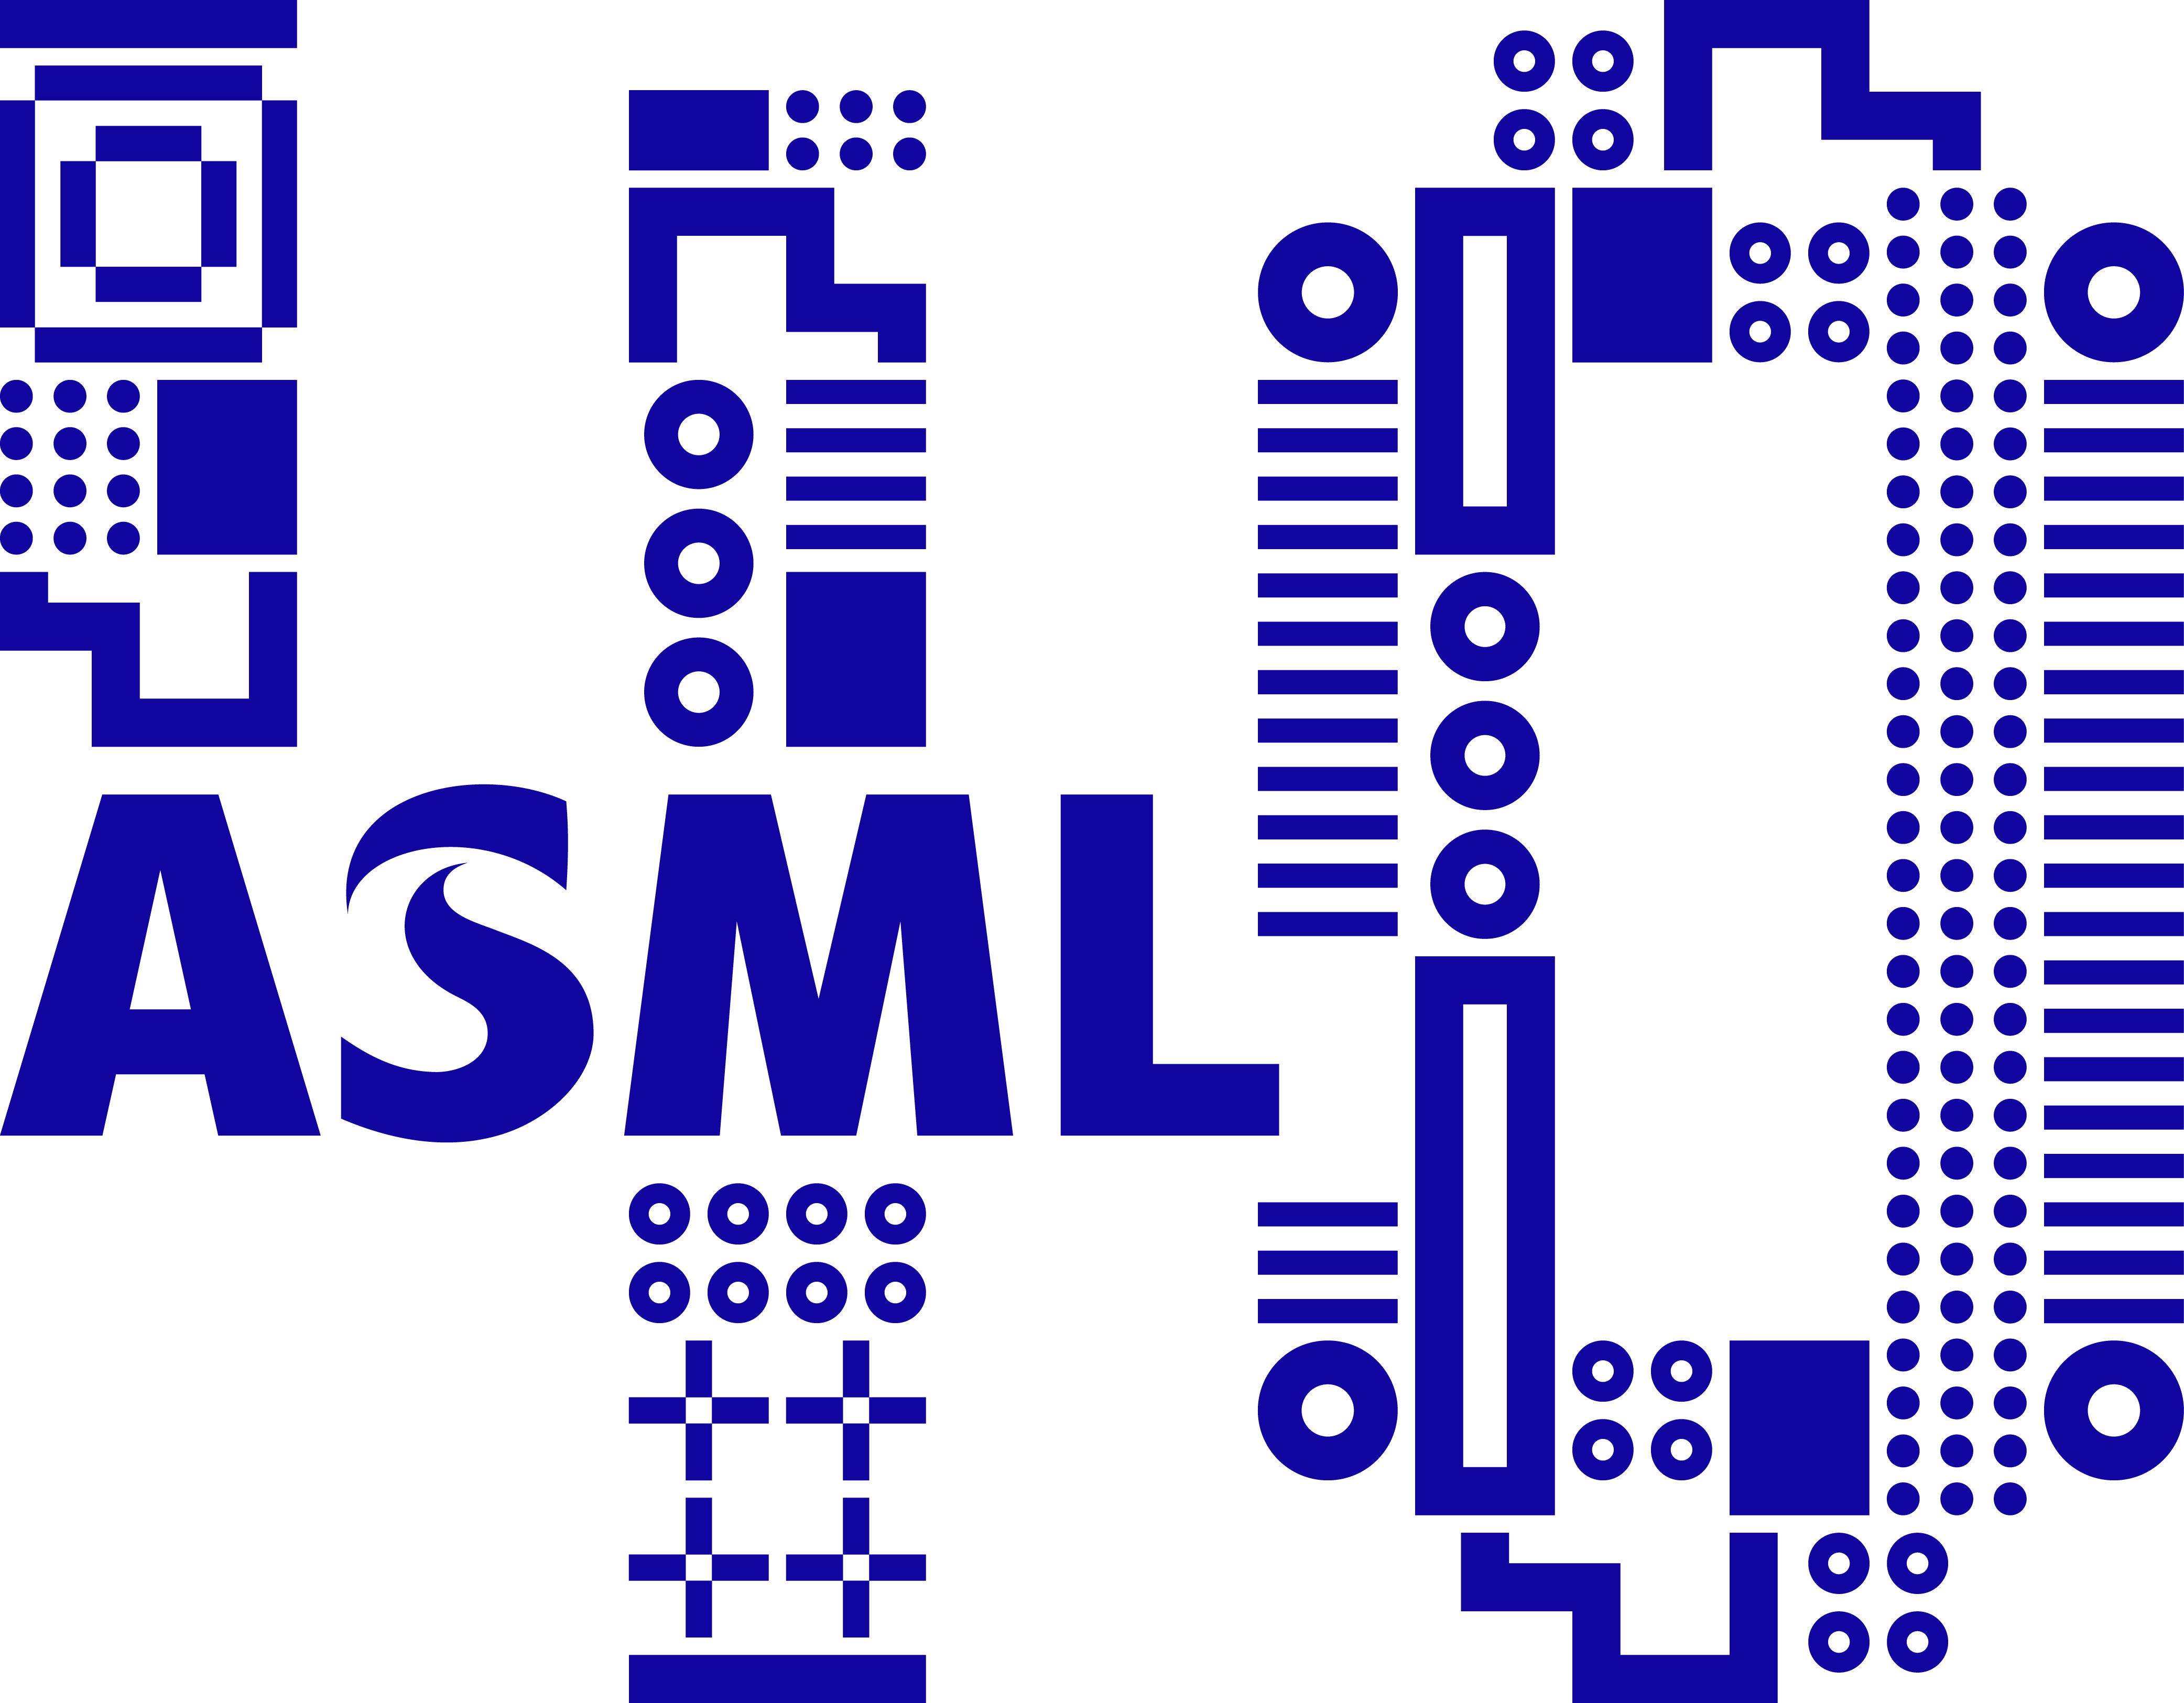 Working at ASML | Supplying the semiconductor industry